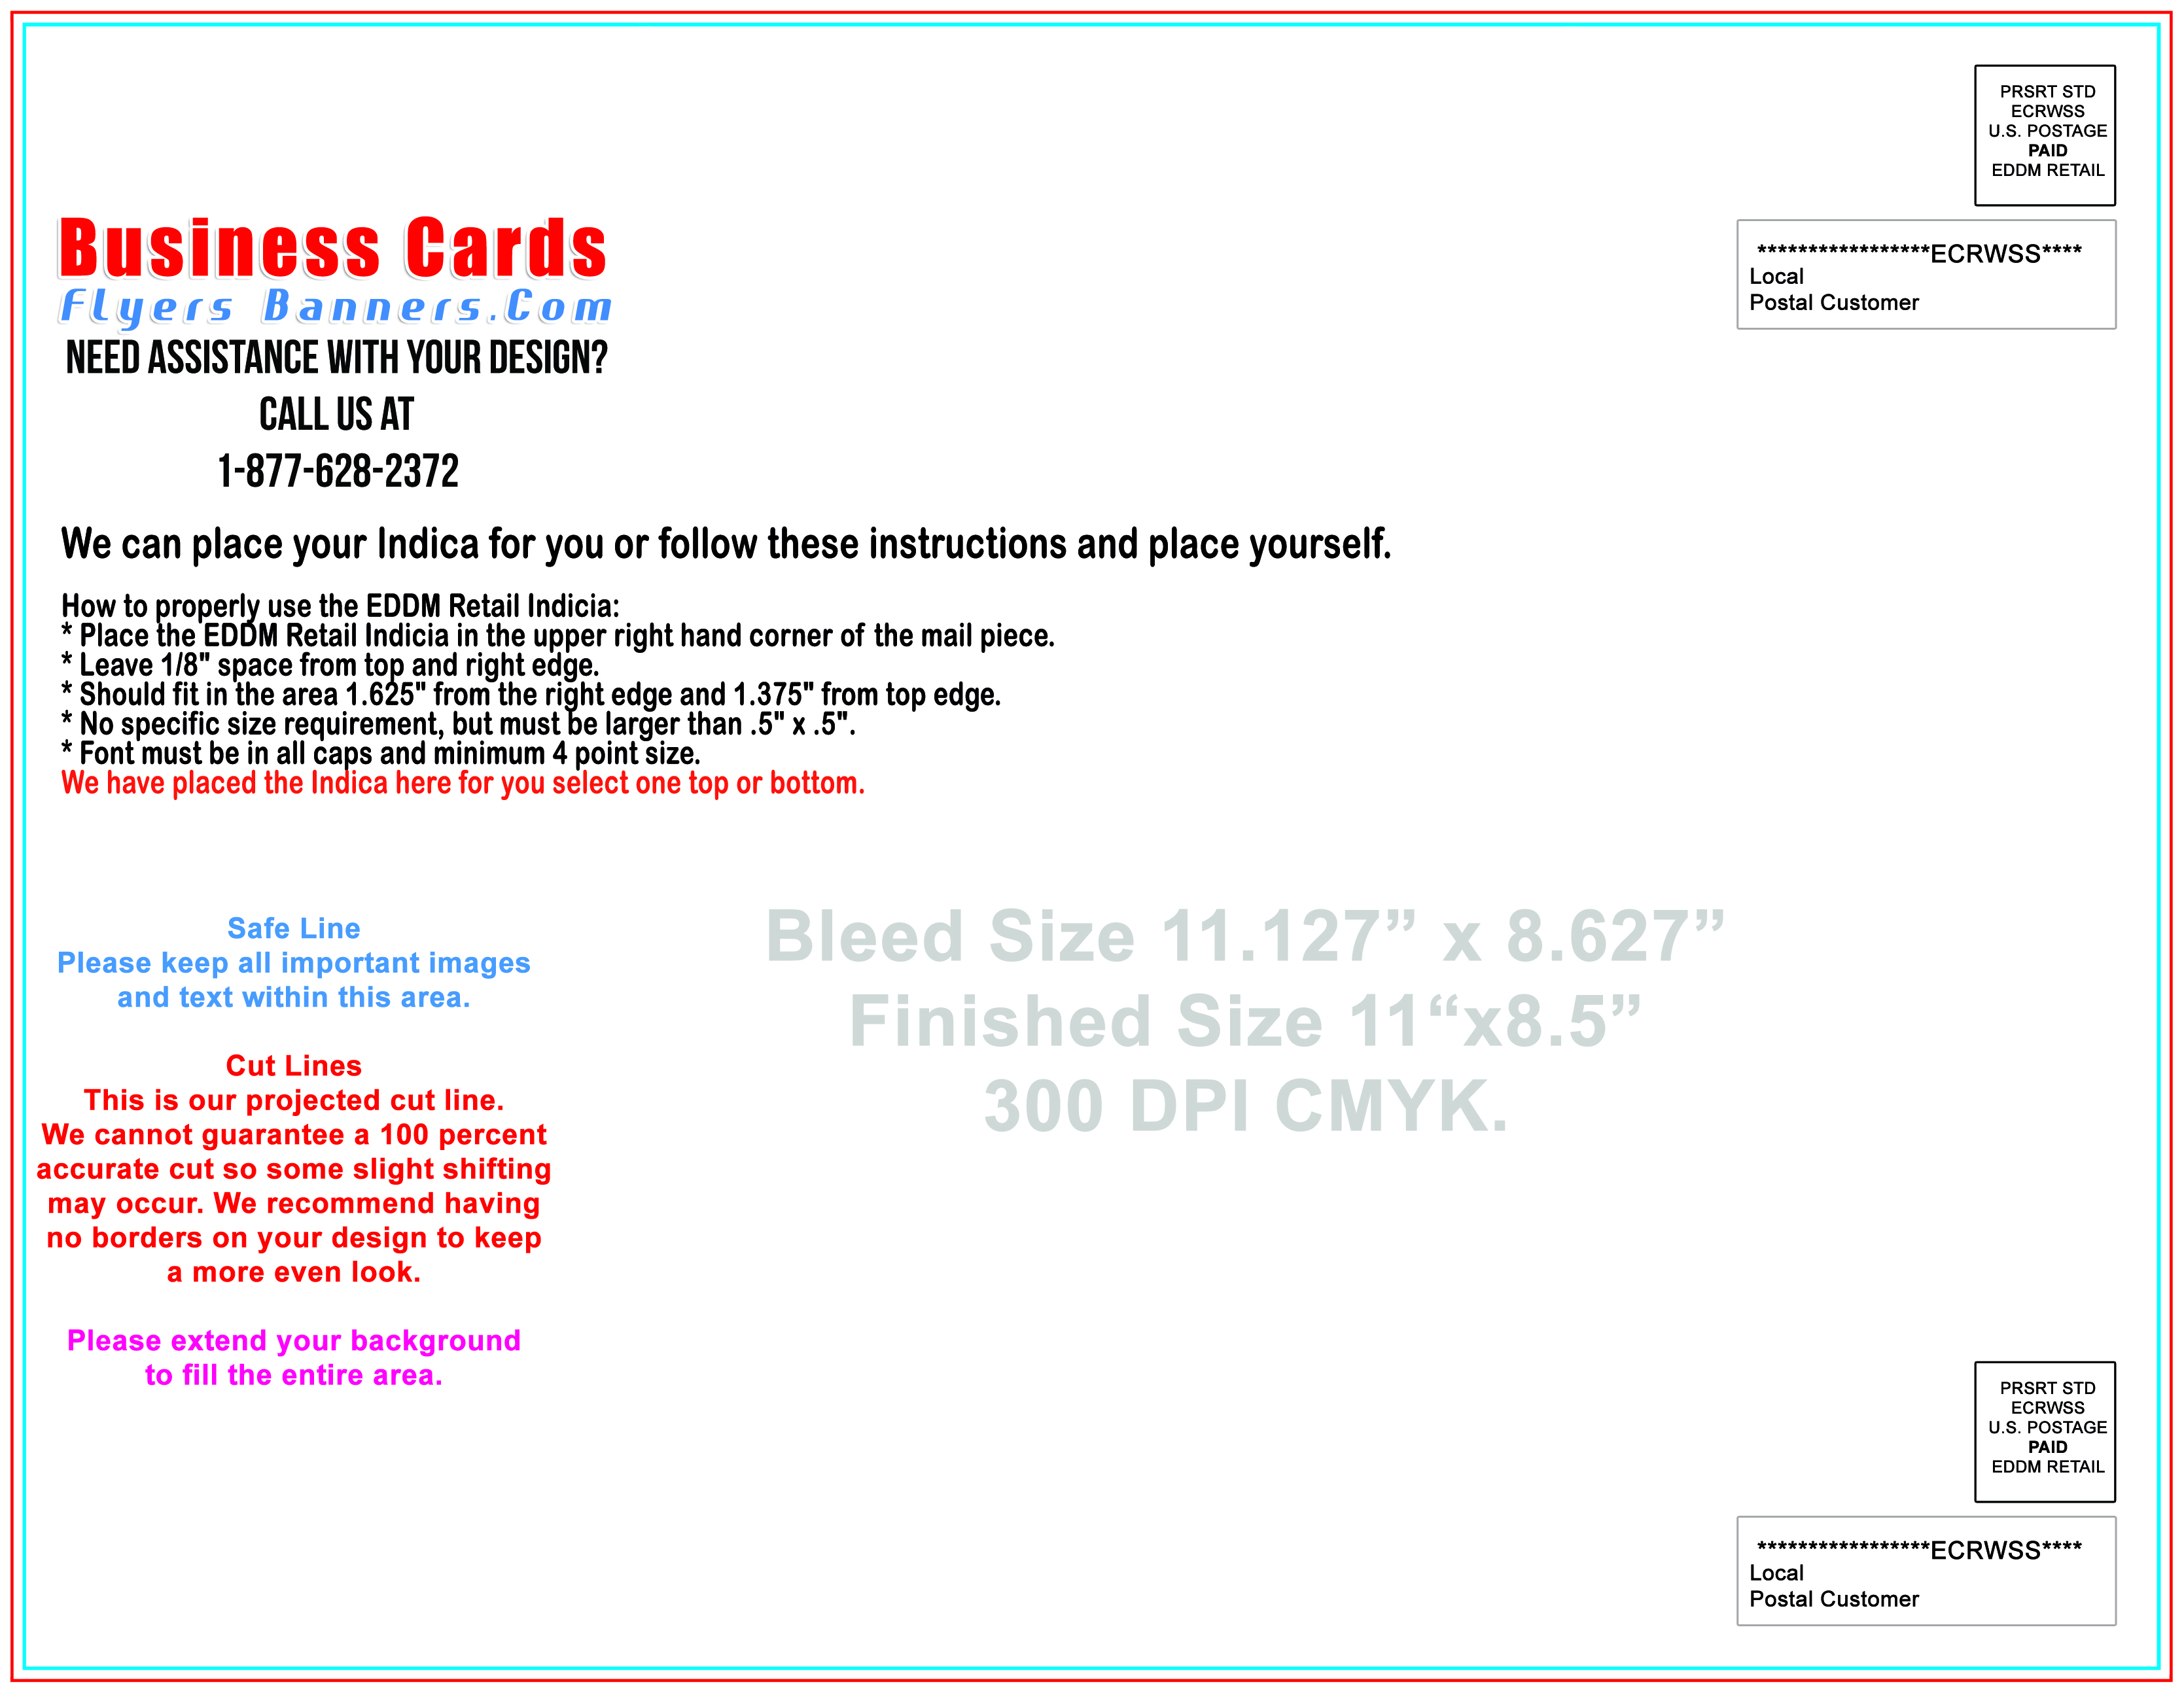 EDDM postcard Templates - Free Shipping and Low Prices With 6X9 Postcard Template